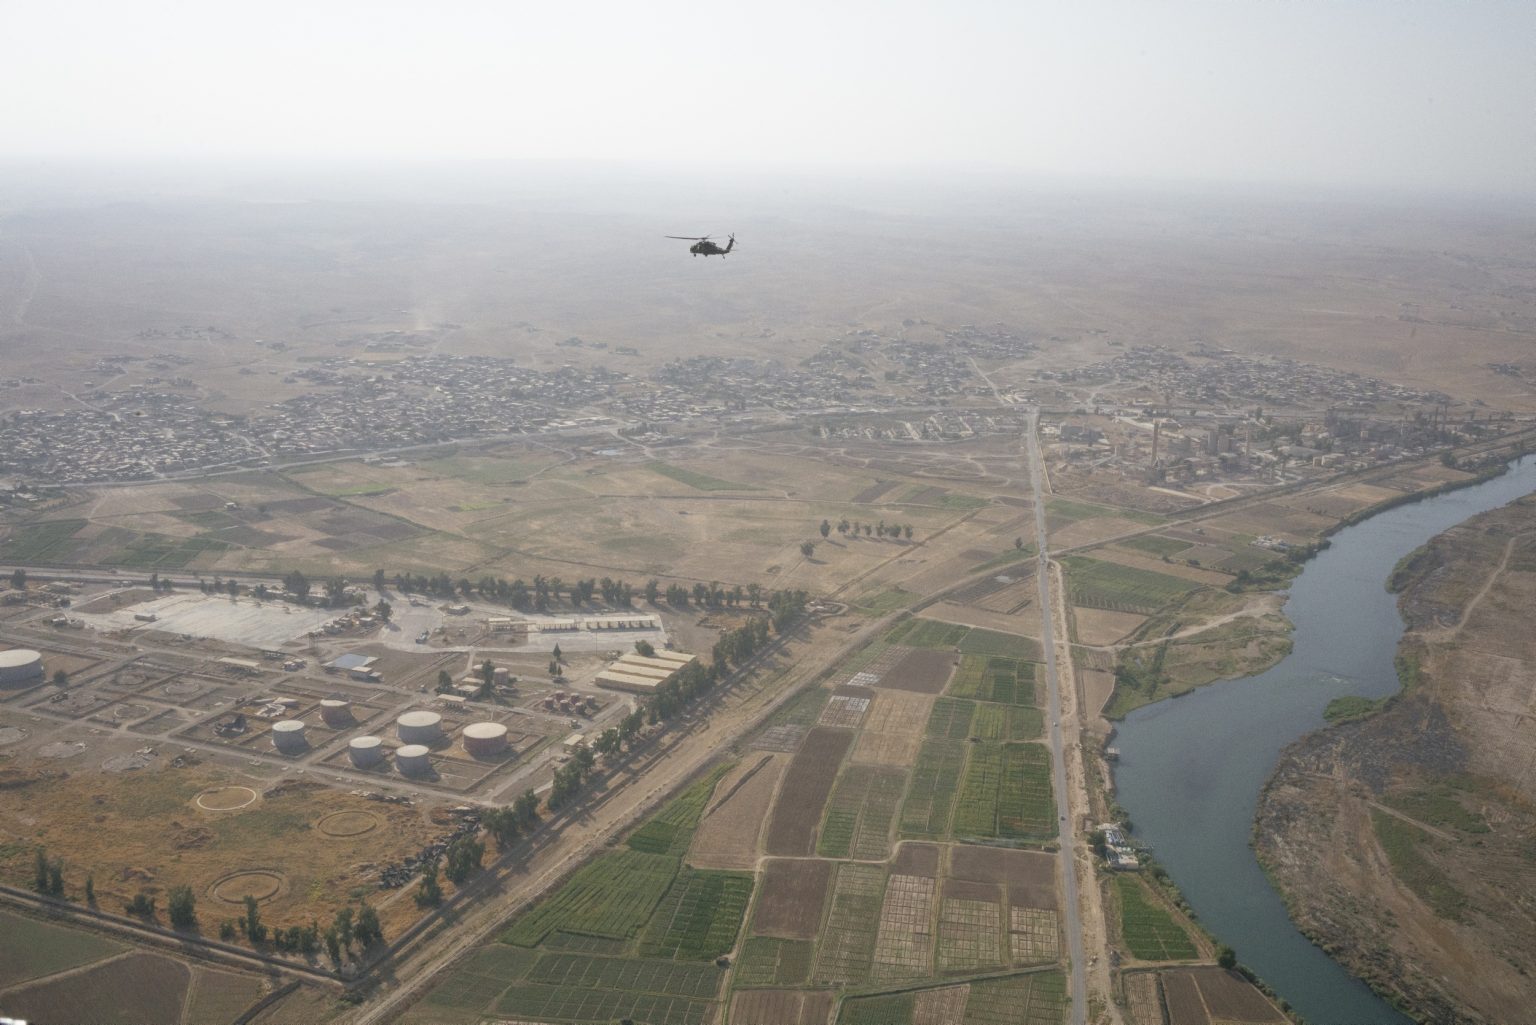 August 24, 2021 - The view from a CH-47 Chinook helicopter during a flight from Erbil Air Base to a remote U.S. Army combat outpost in northeastern Syria known as RLZ.